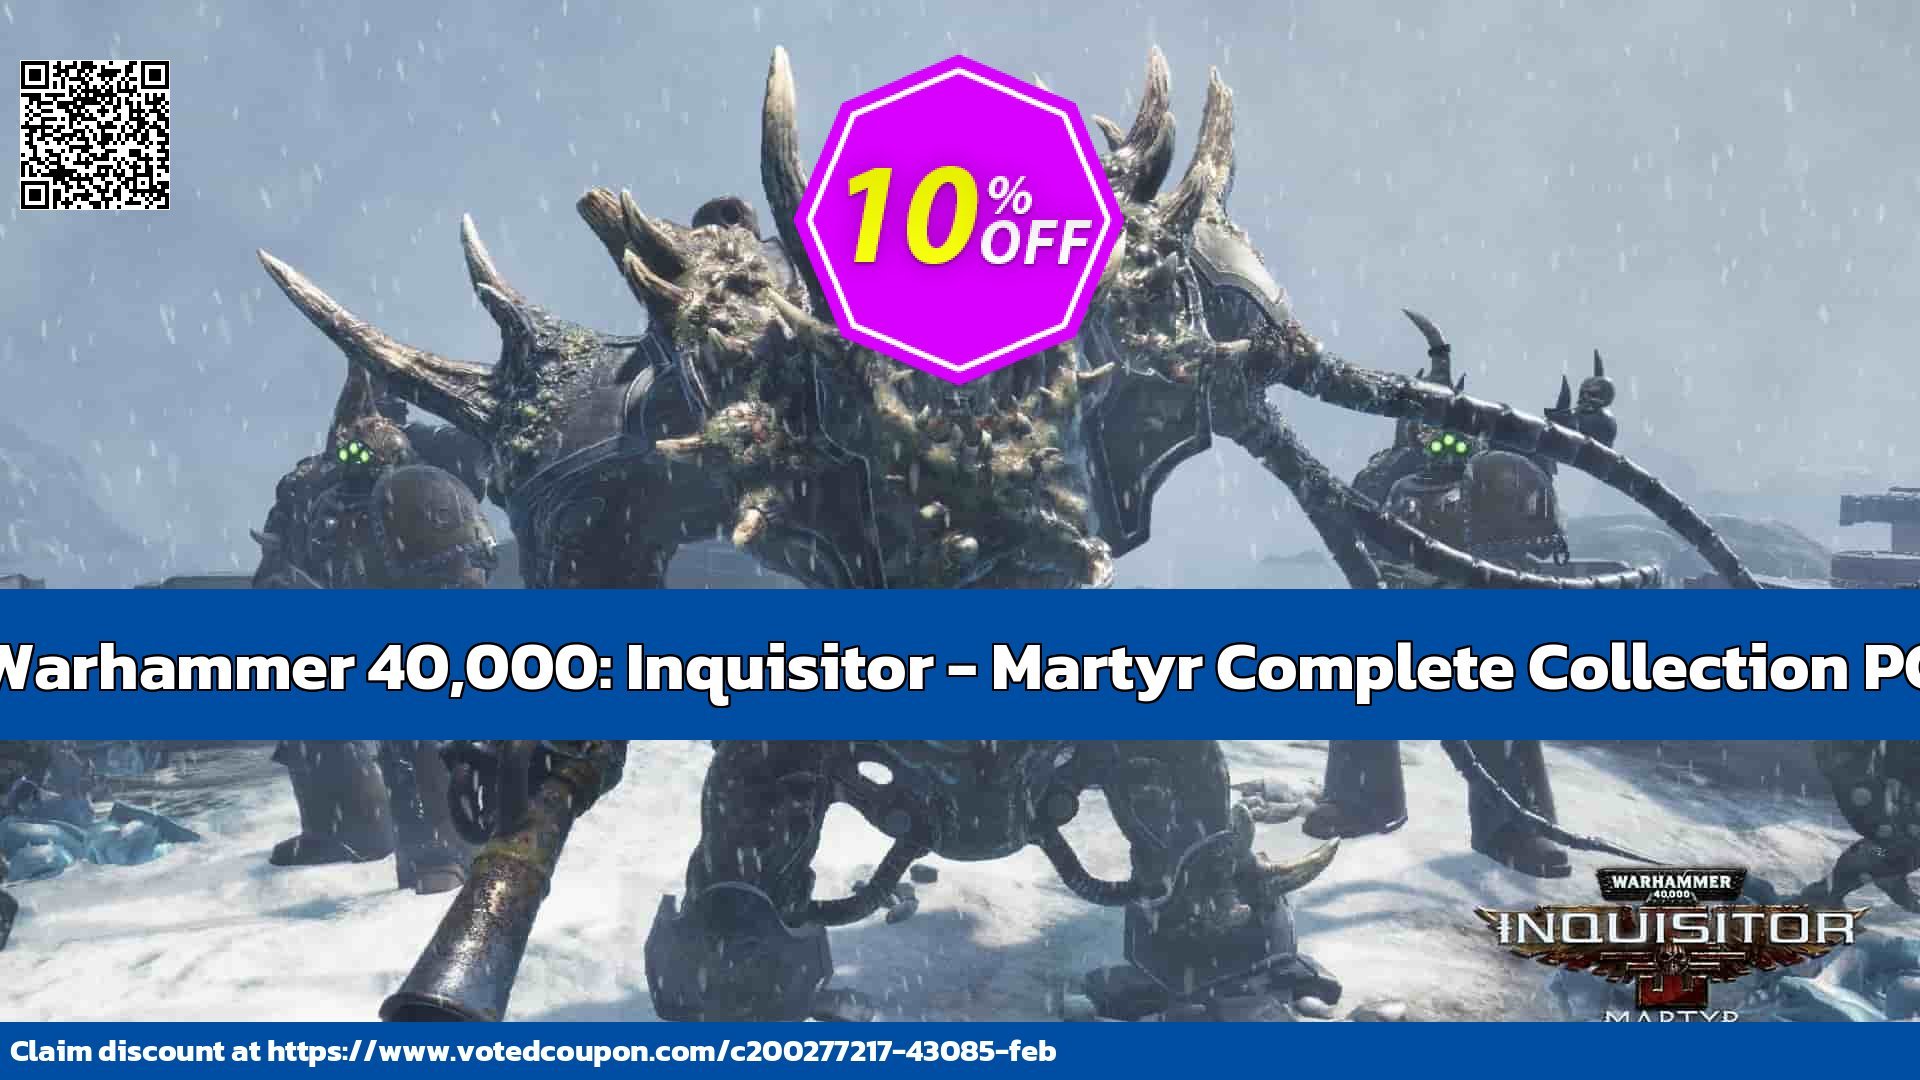 Warhammer 40,000: Inquisitor - Martyr Complete Collection PC Coupon Code May 2024, 10% OFF - VotedCoupon